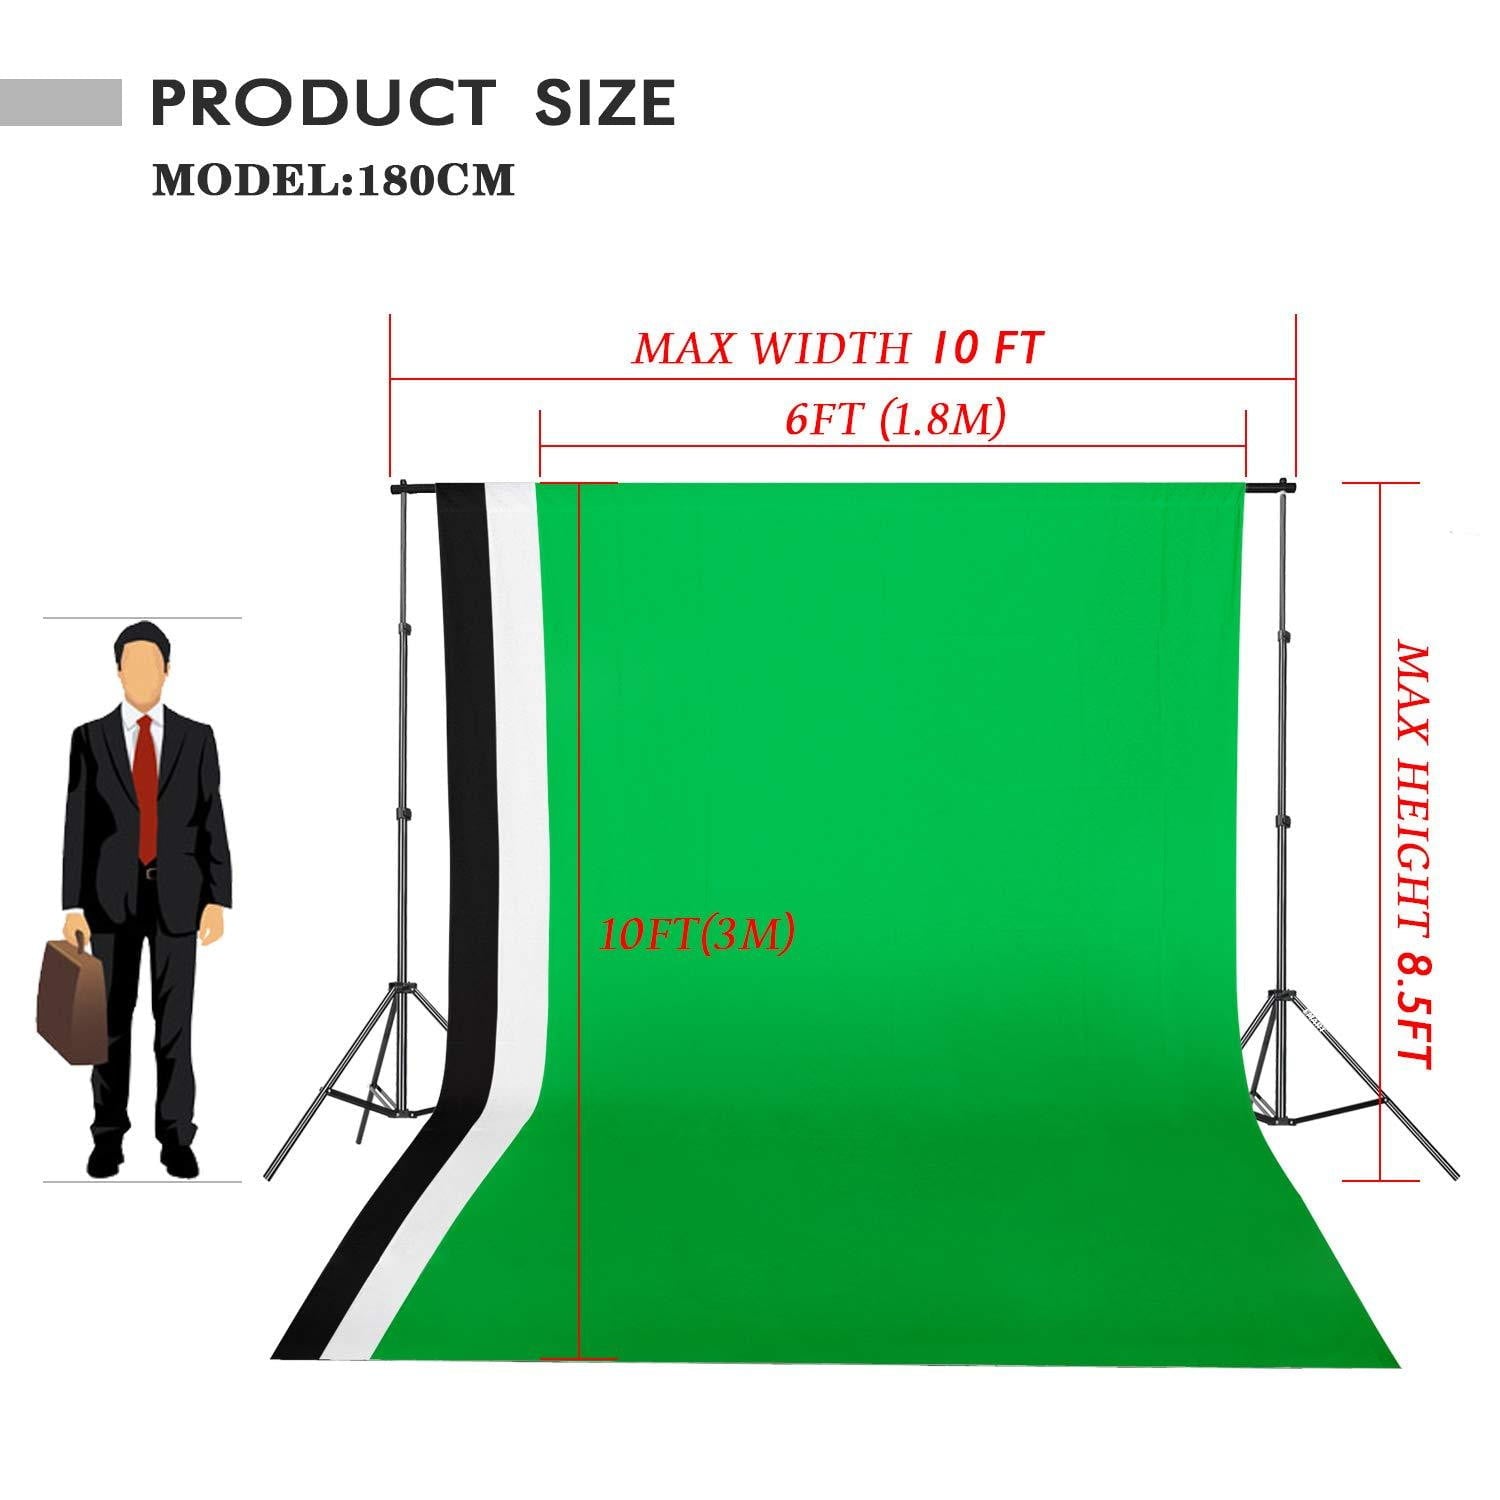 EMART 8.5 x 10 ft Backdrop Support System, with Umbrella Softbox Lighting Set